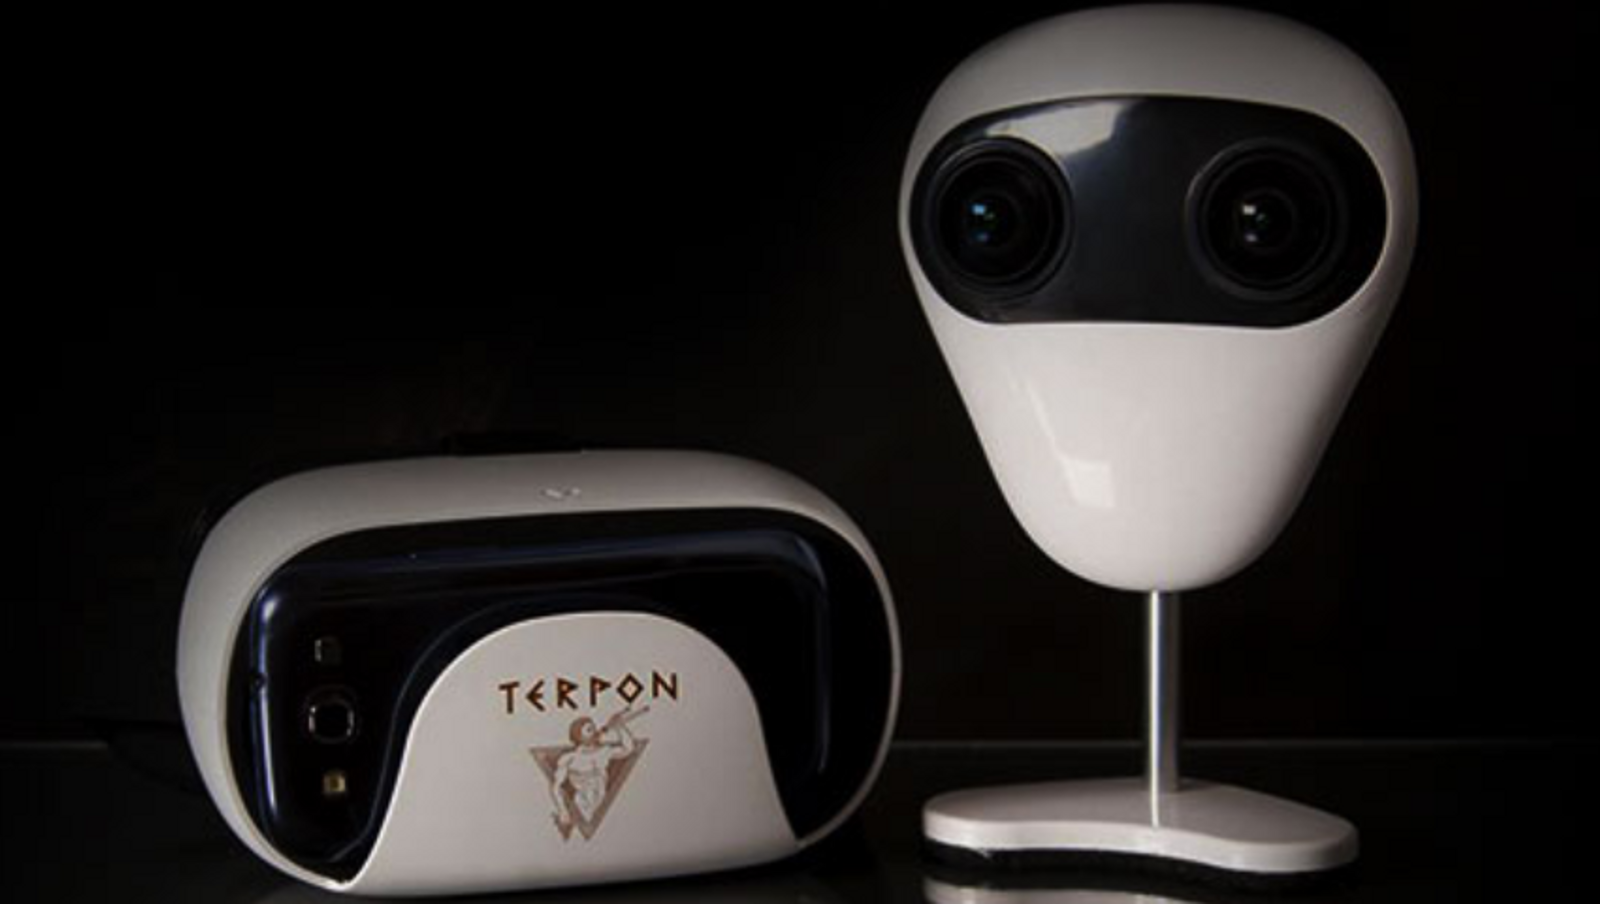 Terpon Provides Free 3D VR Webcams to First 1,000 Live Models